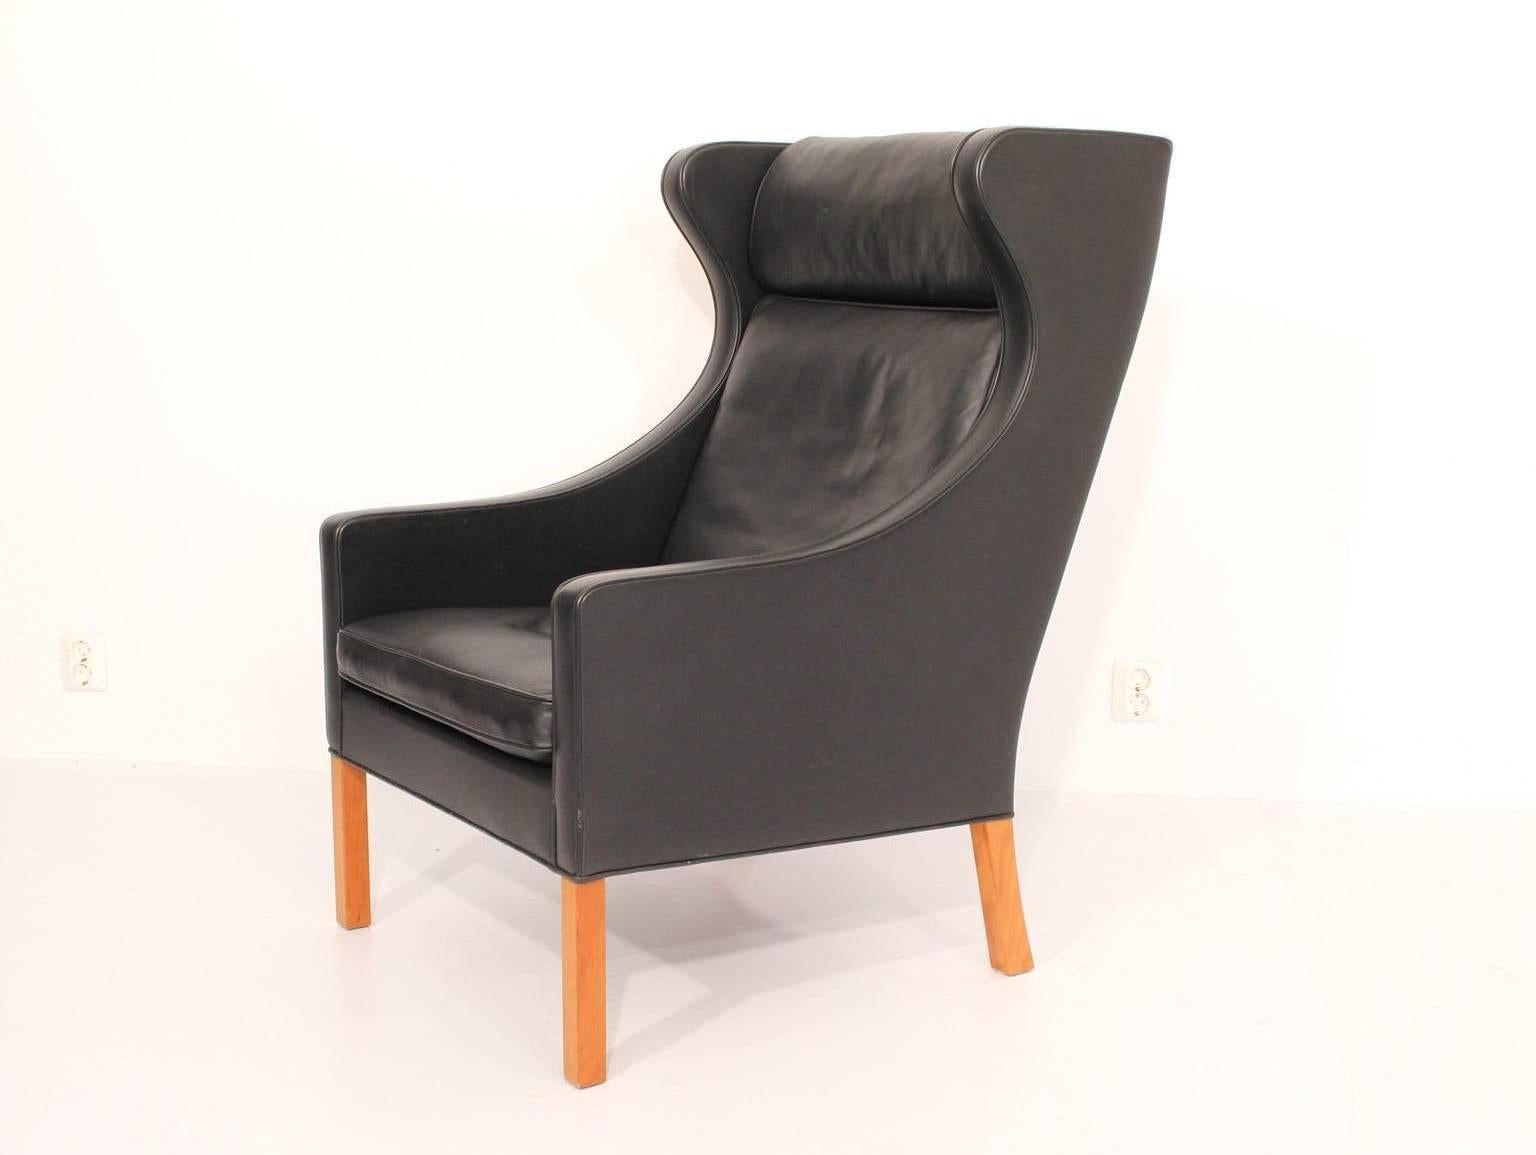 Wingback chair in original black leather.
Design Børge Mogensen, 1963.
Made by Fredericia Stolefabrik, Denmark.

Mogensen's high back wing chair has a sharply defined outline and a softly encompassing interior, which has made it one of his most